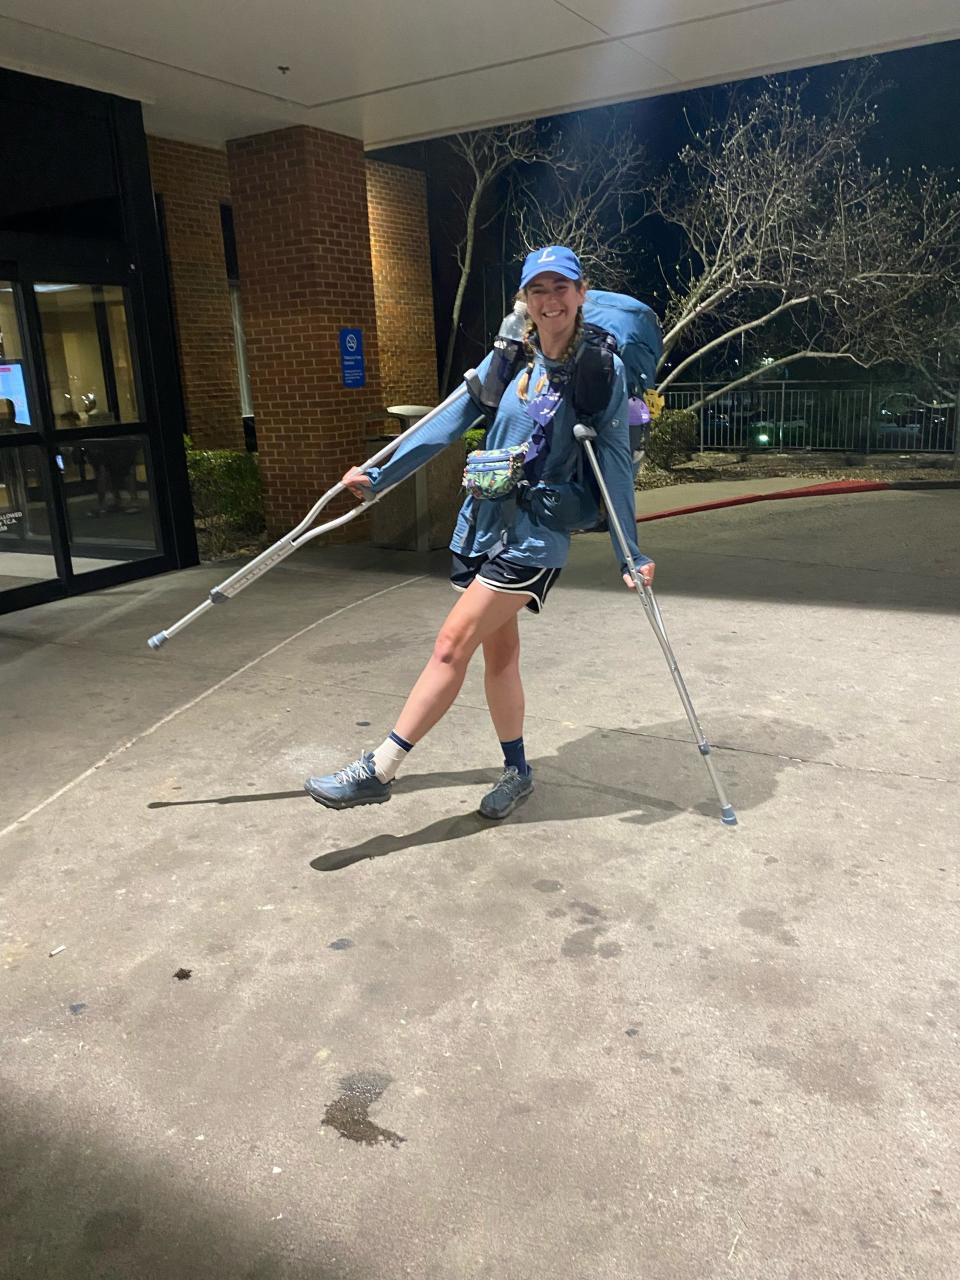 Poughkeepsie native Alexis Holzmann poses playfully with her crutches after suffering an ankle injury that required a hospital visit in April 2023 during her hike of the Appalachian Trail.